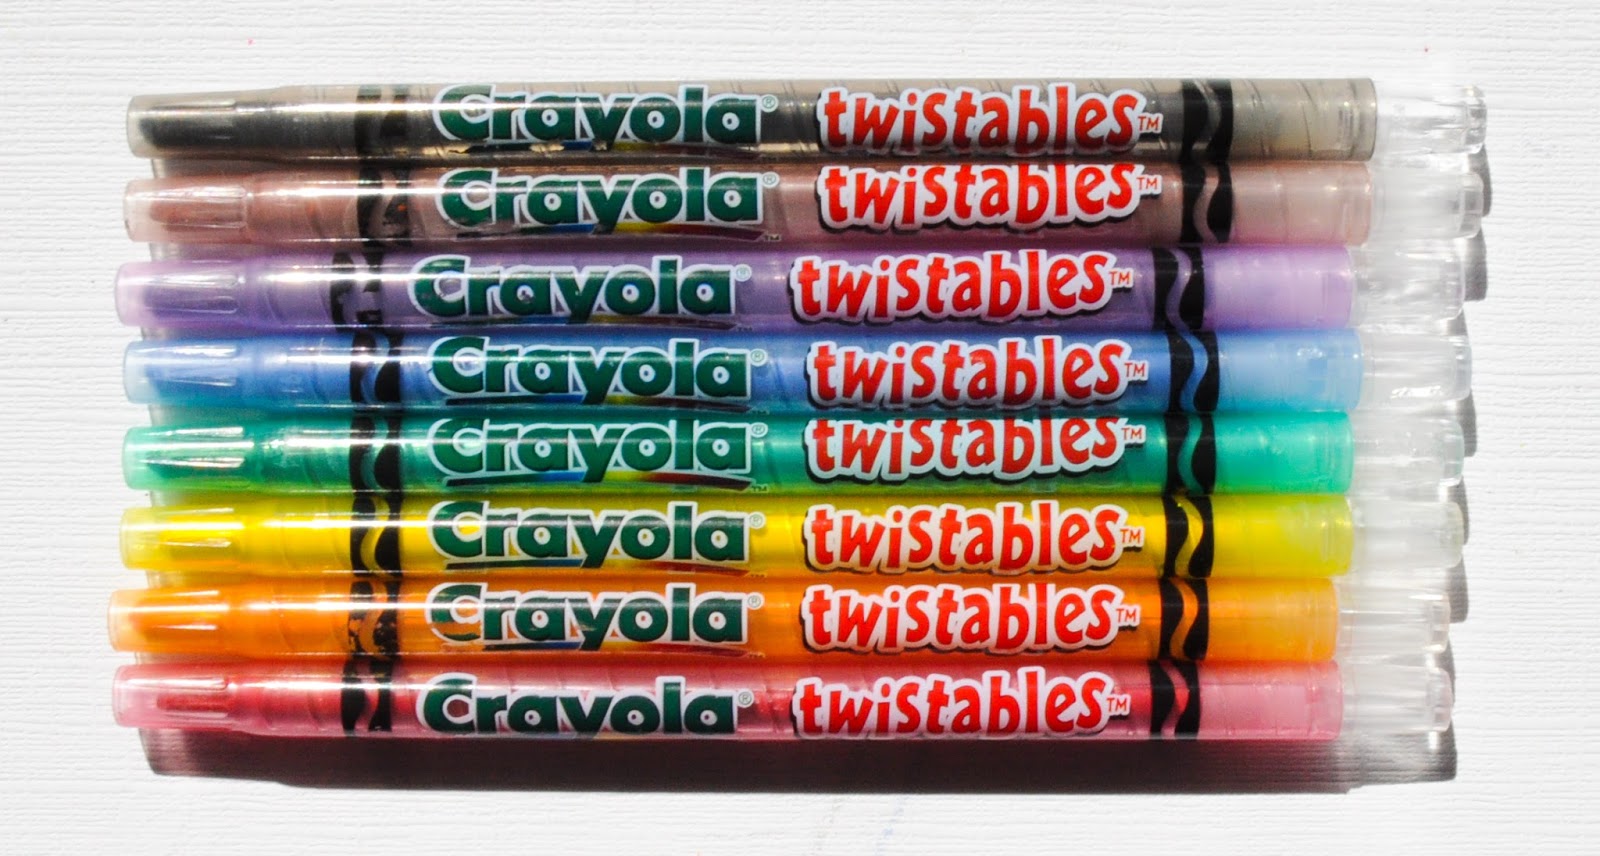 8 Count Crayola Twistable Crayons: What's Inside the Box